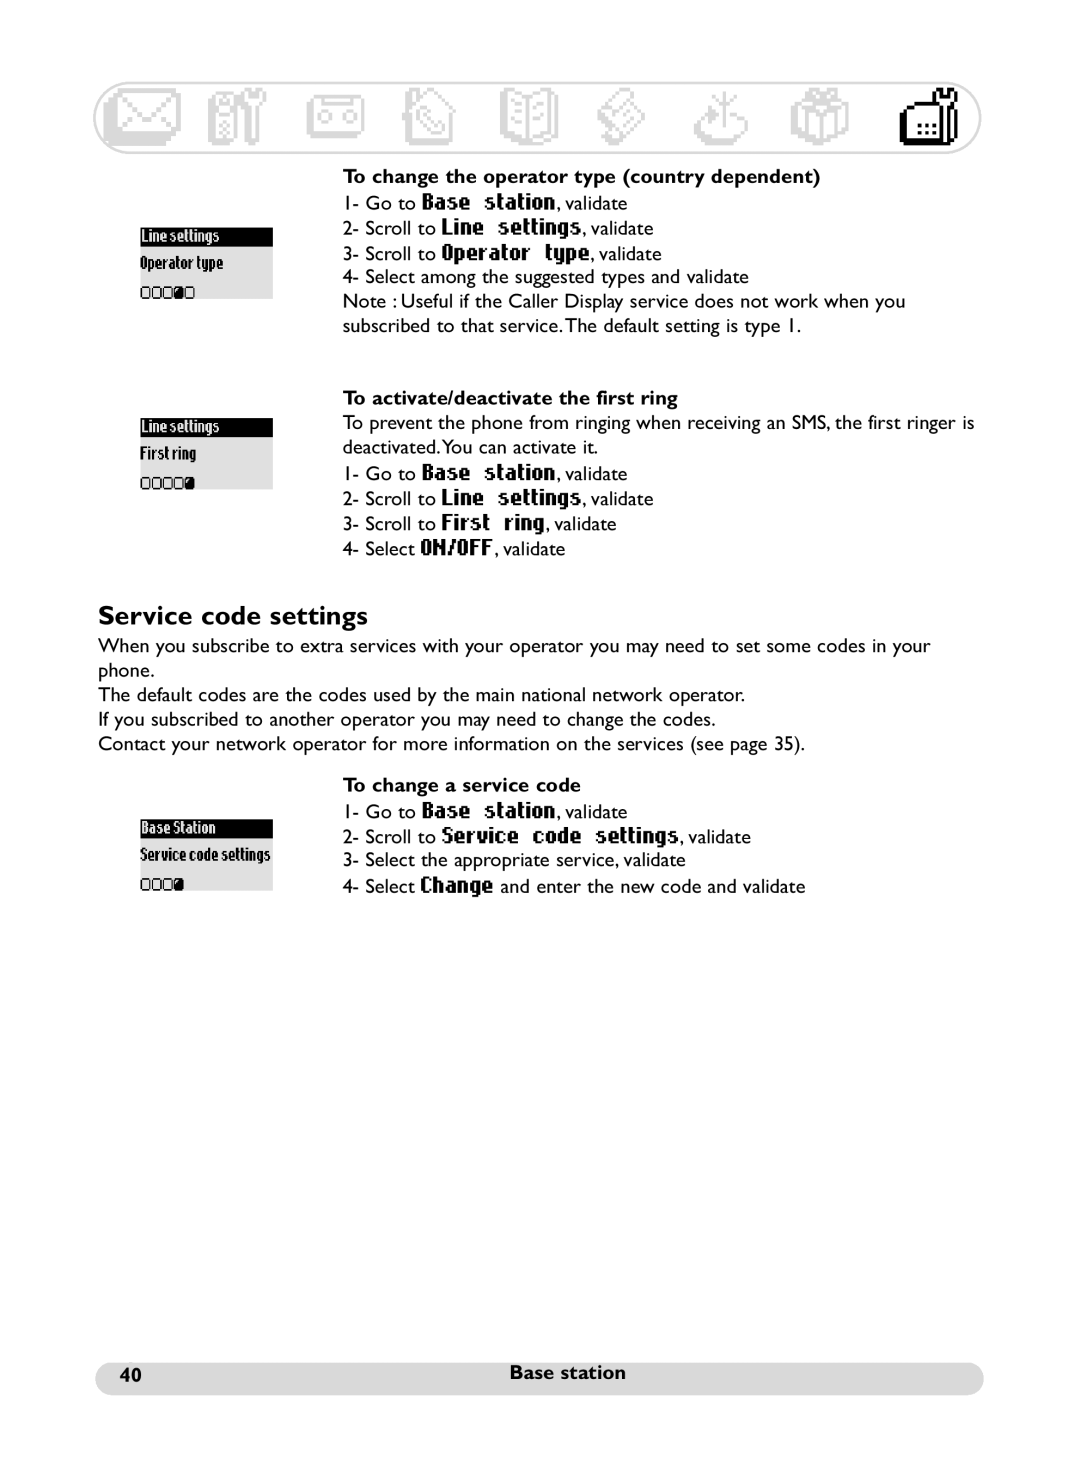 Philips 380 Duo Vox, Onis 380 Vox manual Service code settings 